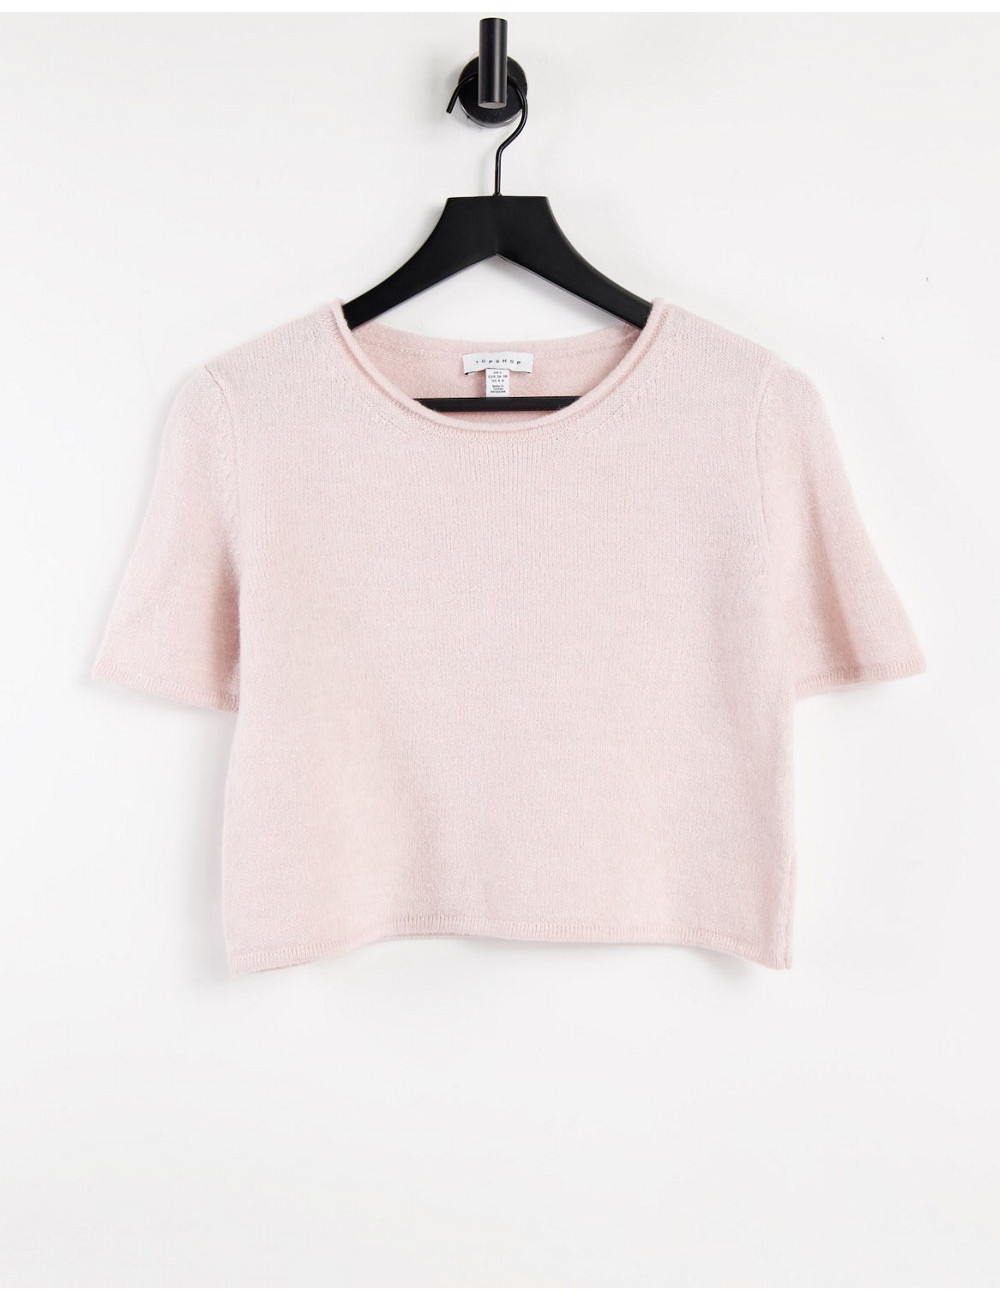 Topshop knitted boxy tee in...